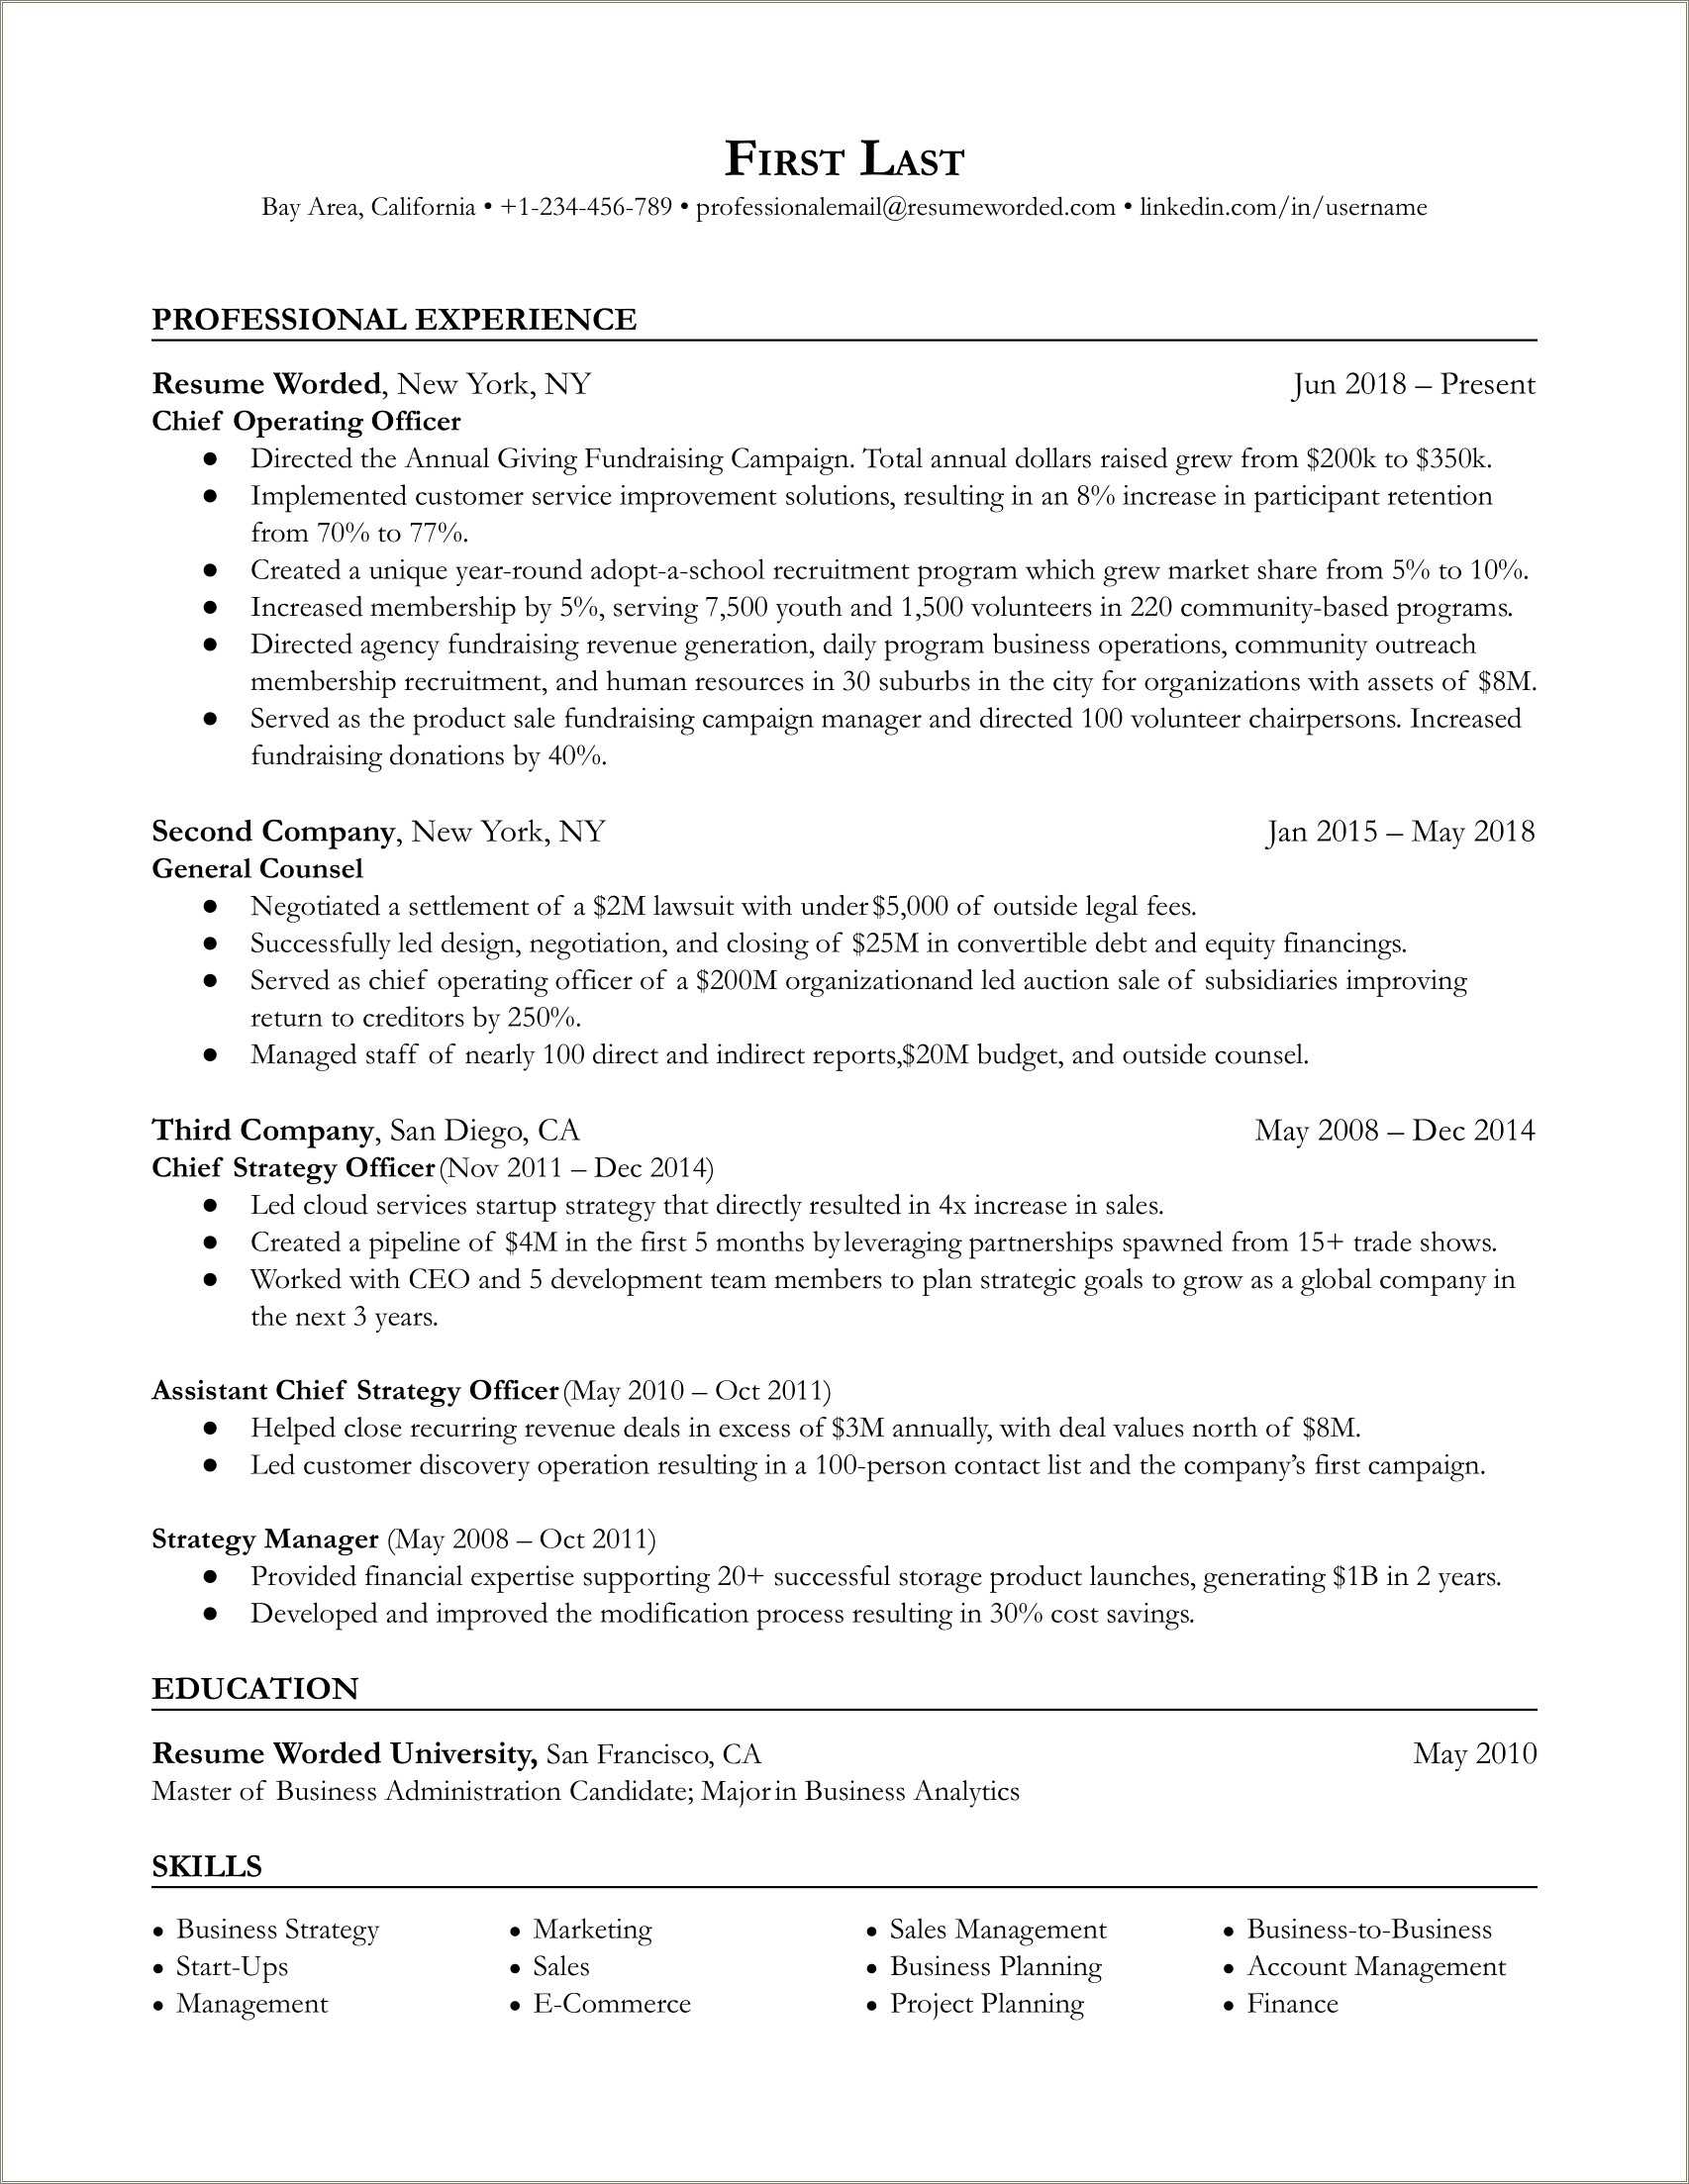 Sample Resume Images With Skills Listed